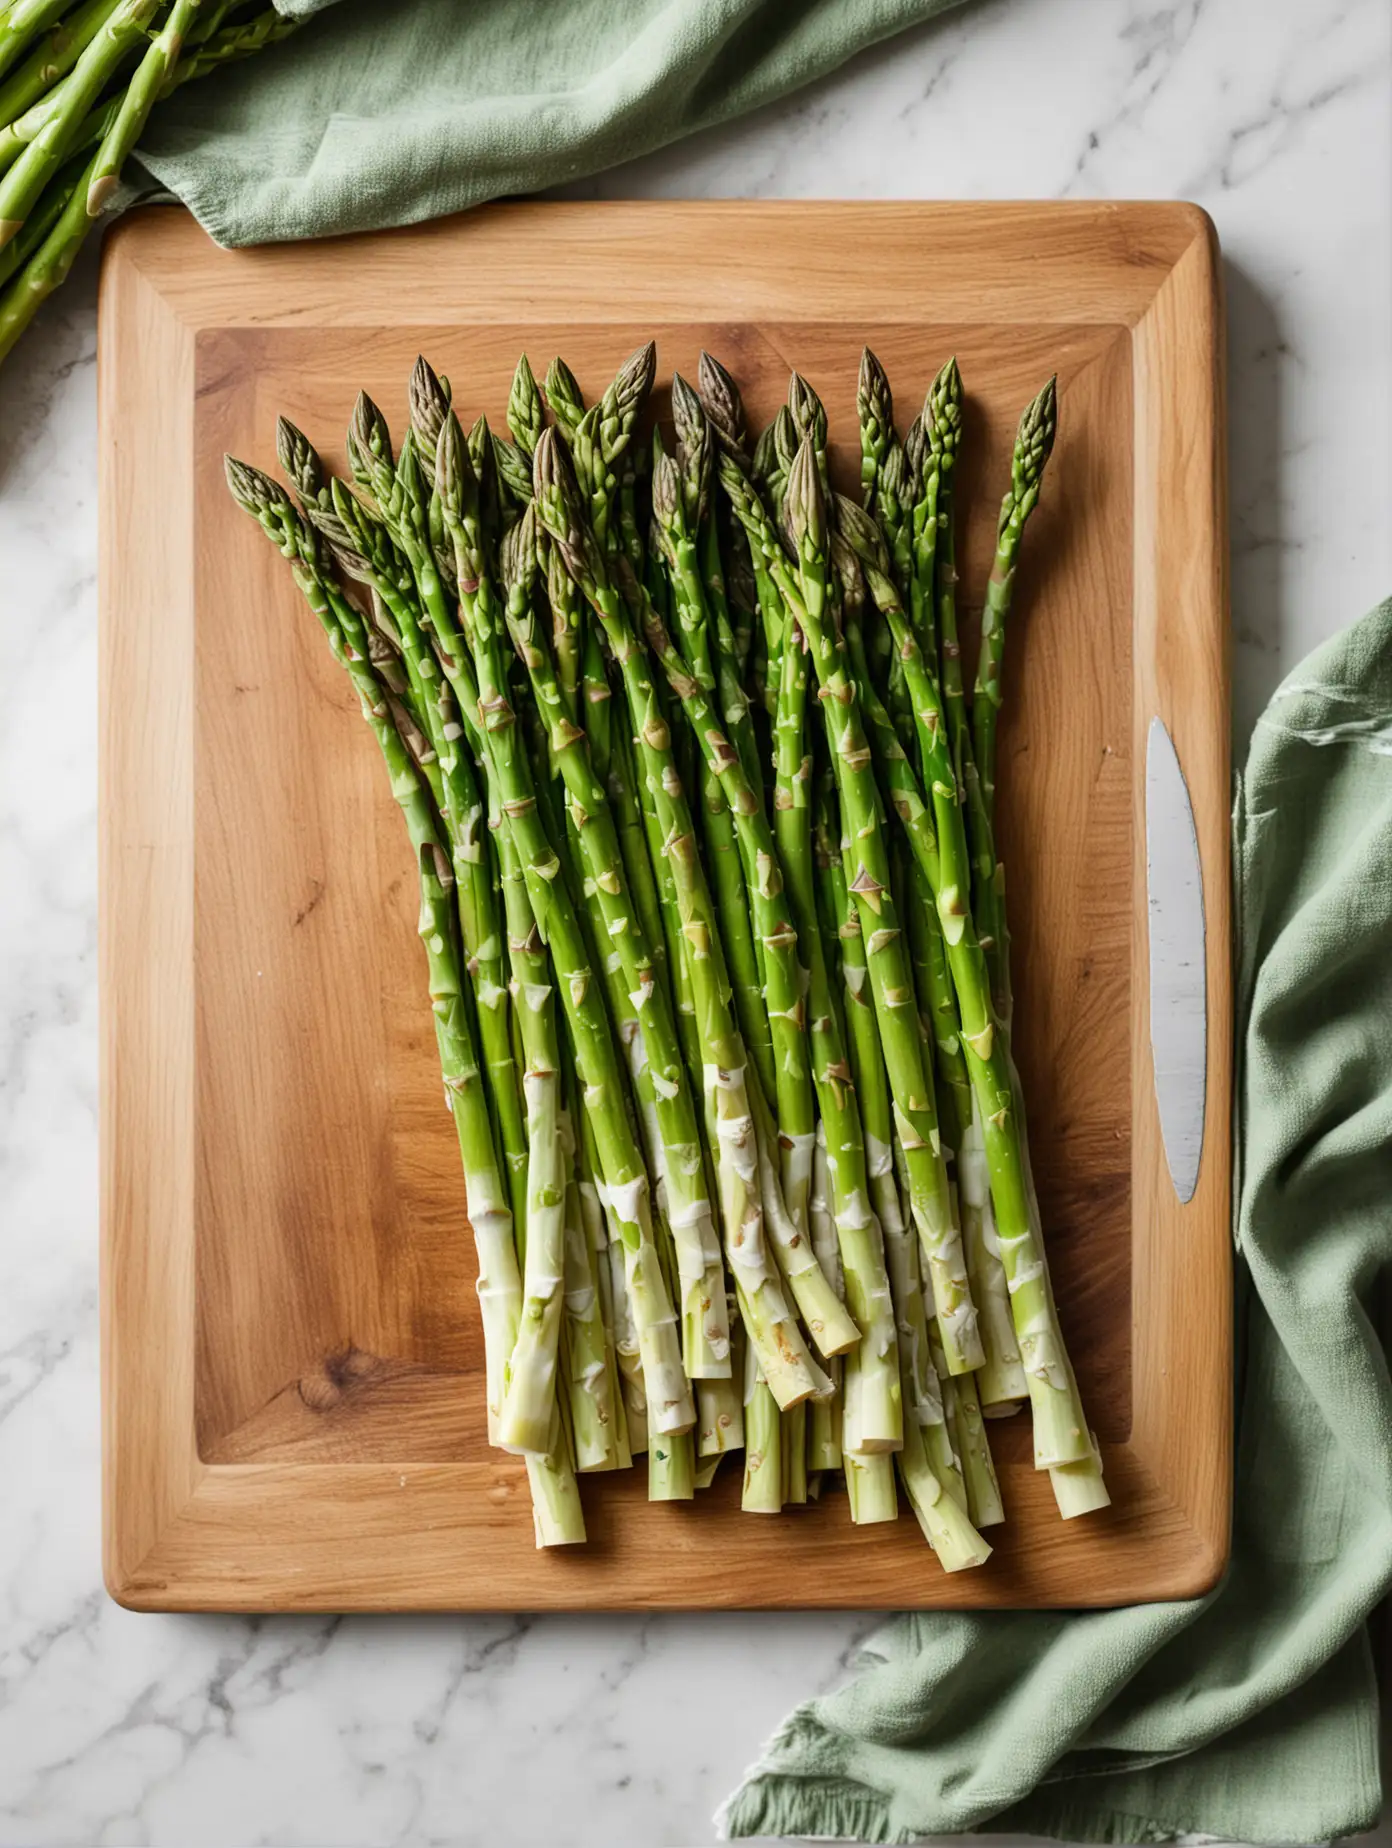 Fresh Asparagus on Wooden Cutting Board Kitchen Cooking Scene